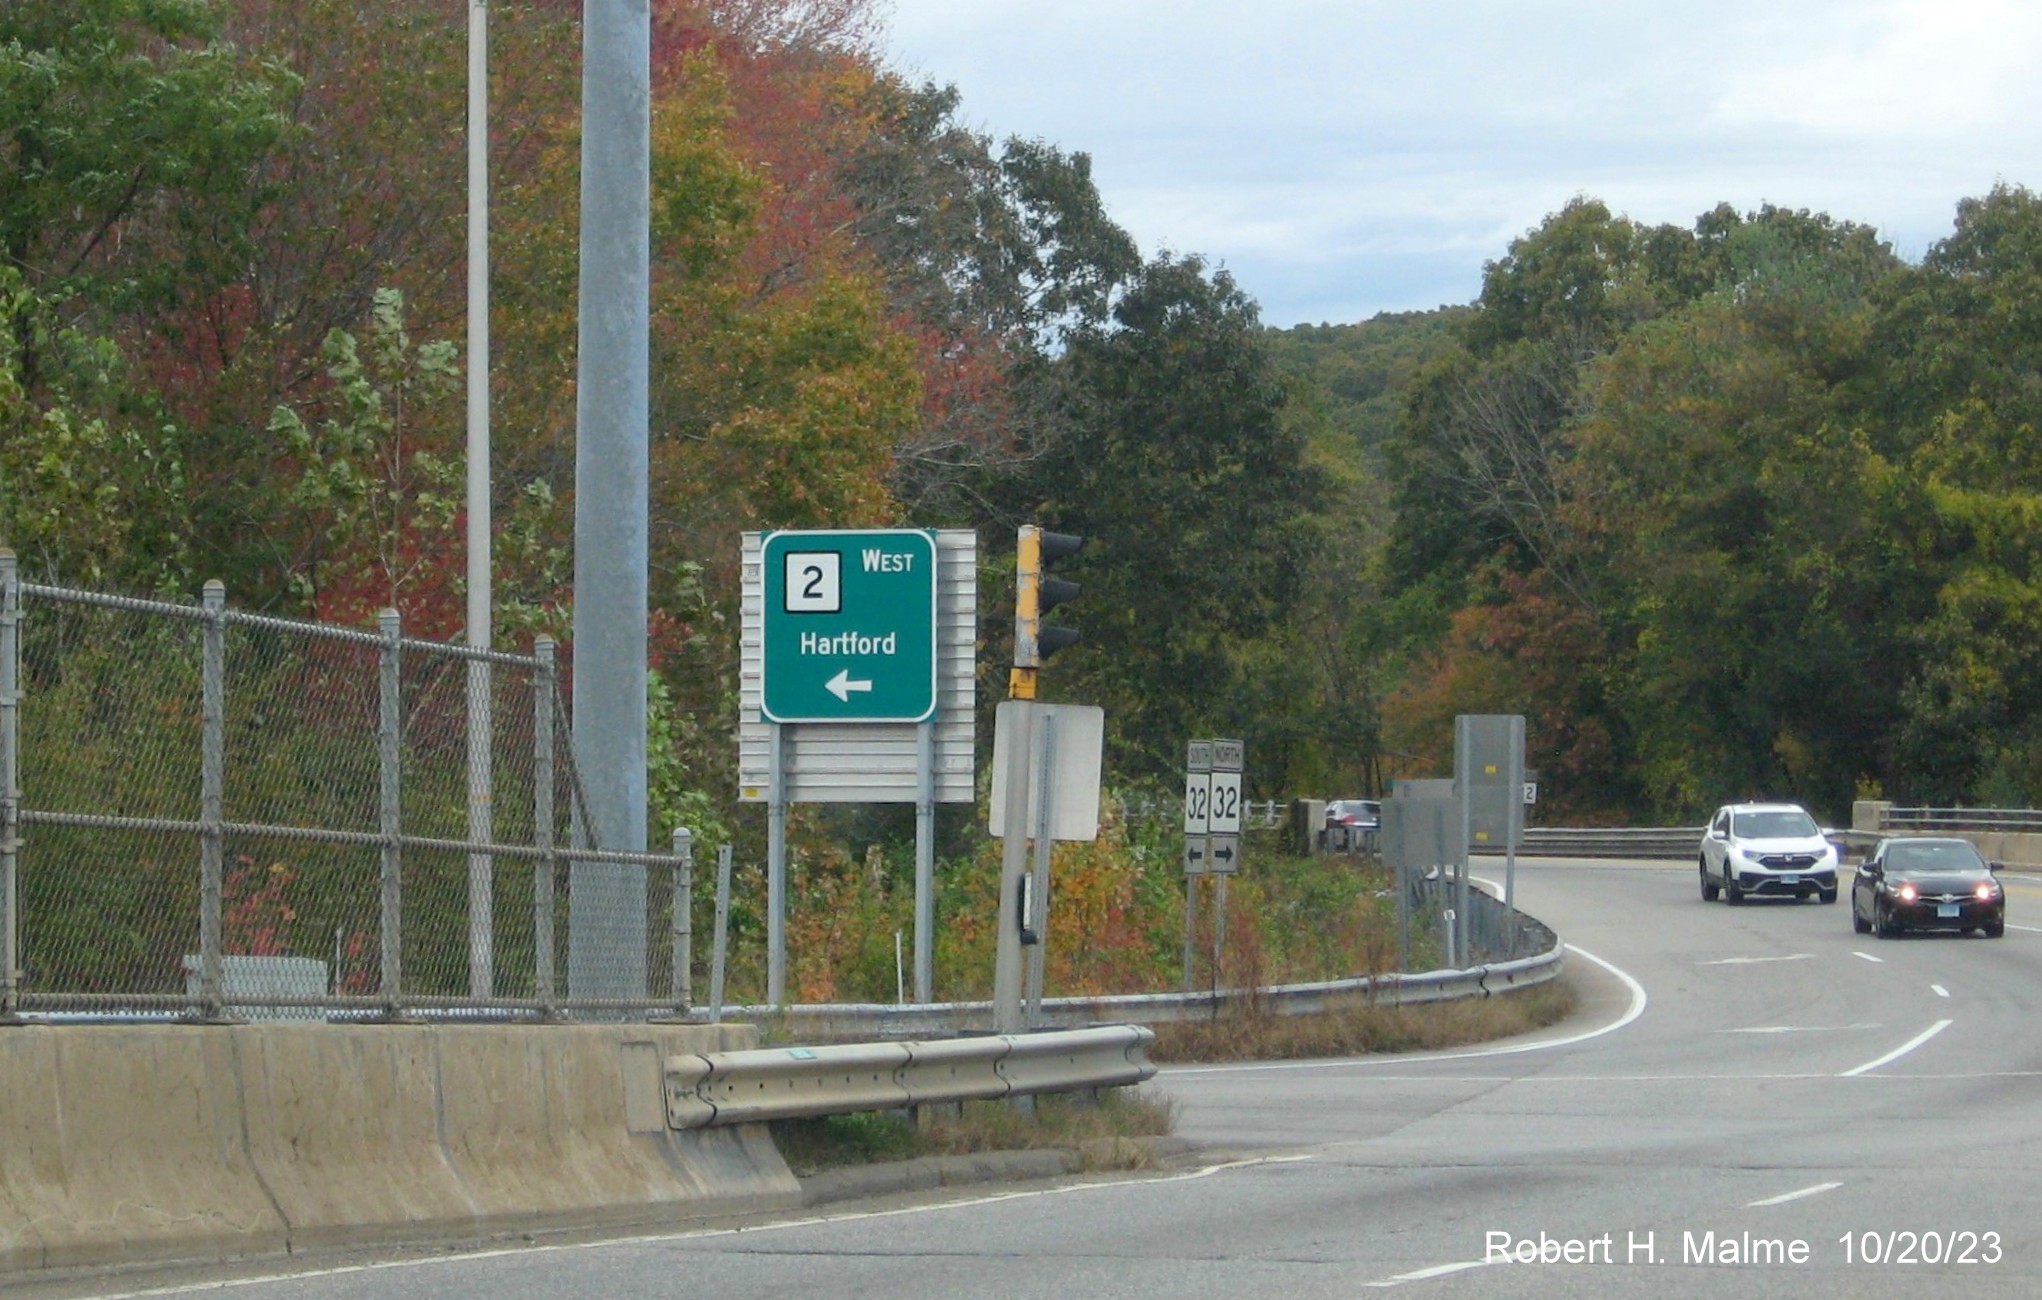 Image of new ramp entrance sign for CT 2 West on CT 32 in Norwich, October 2023